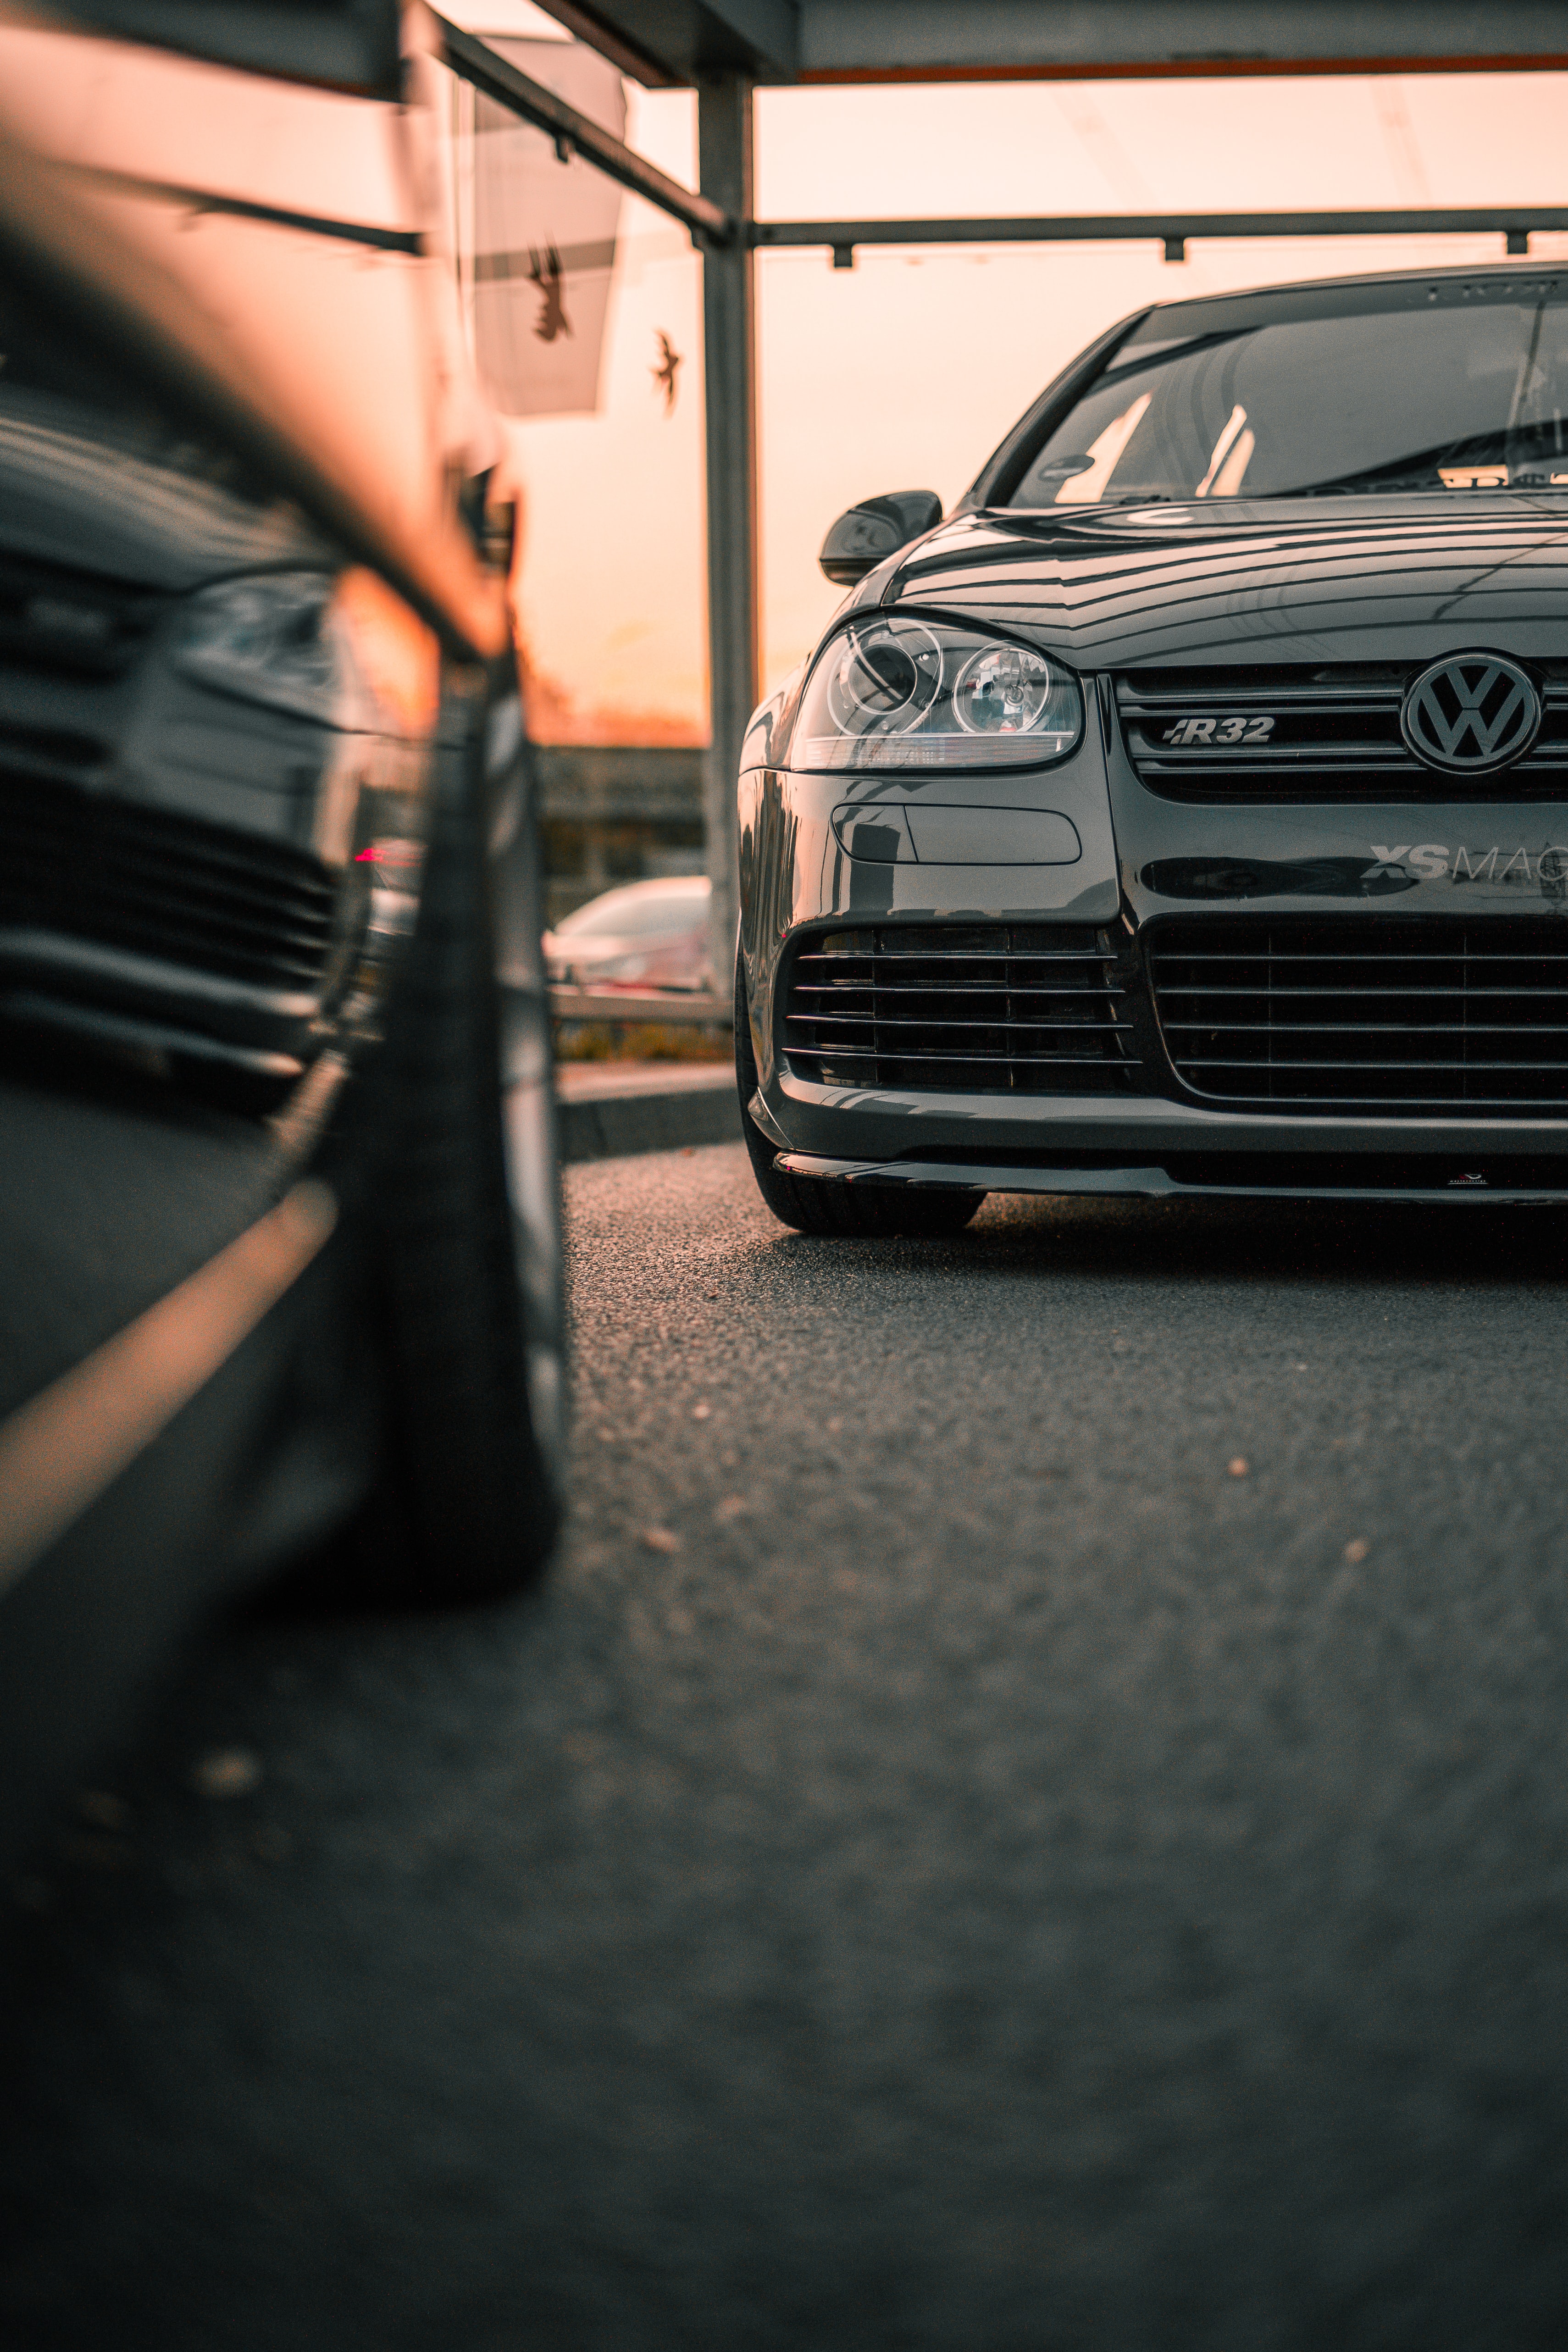 Latest Mobile Wallpaper volkswagen r32, front view, cars, car